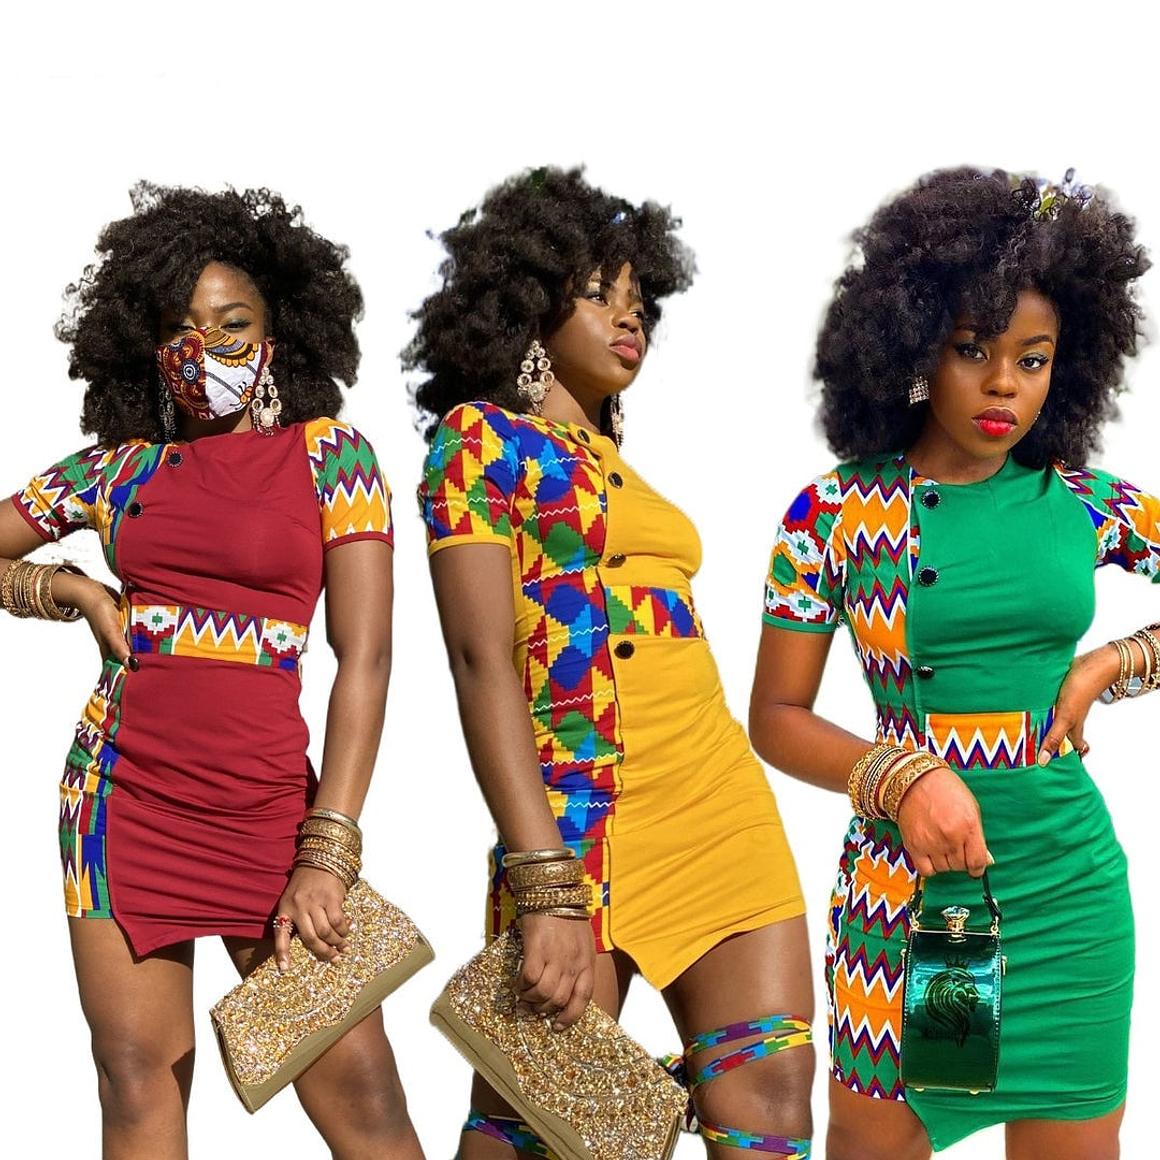 Dashiki Print Mini Dress - Available in Red, Yellow or Green